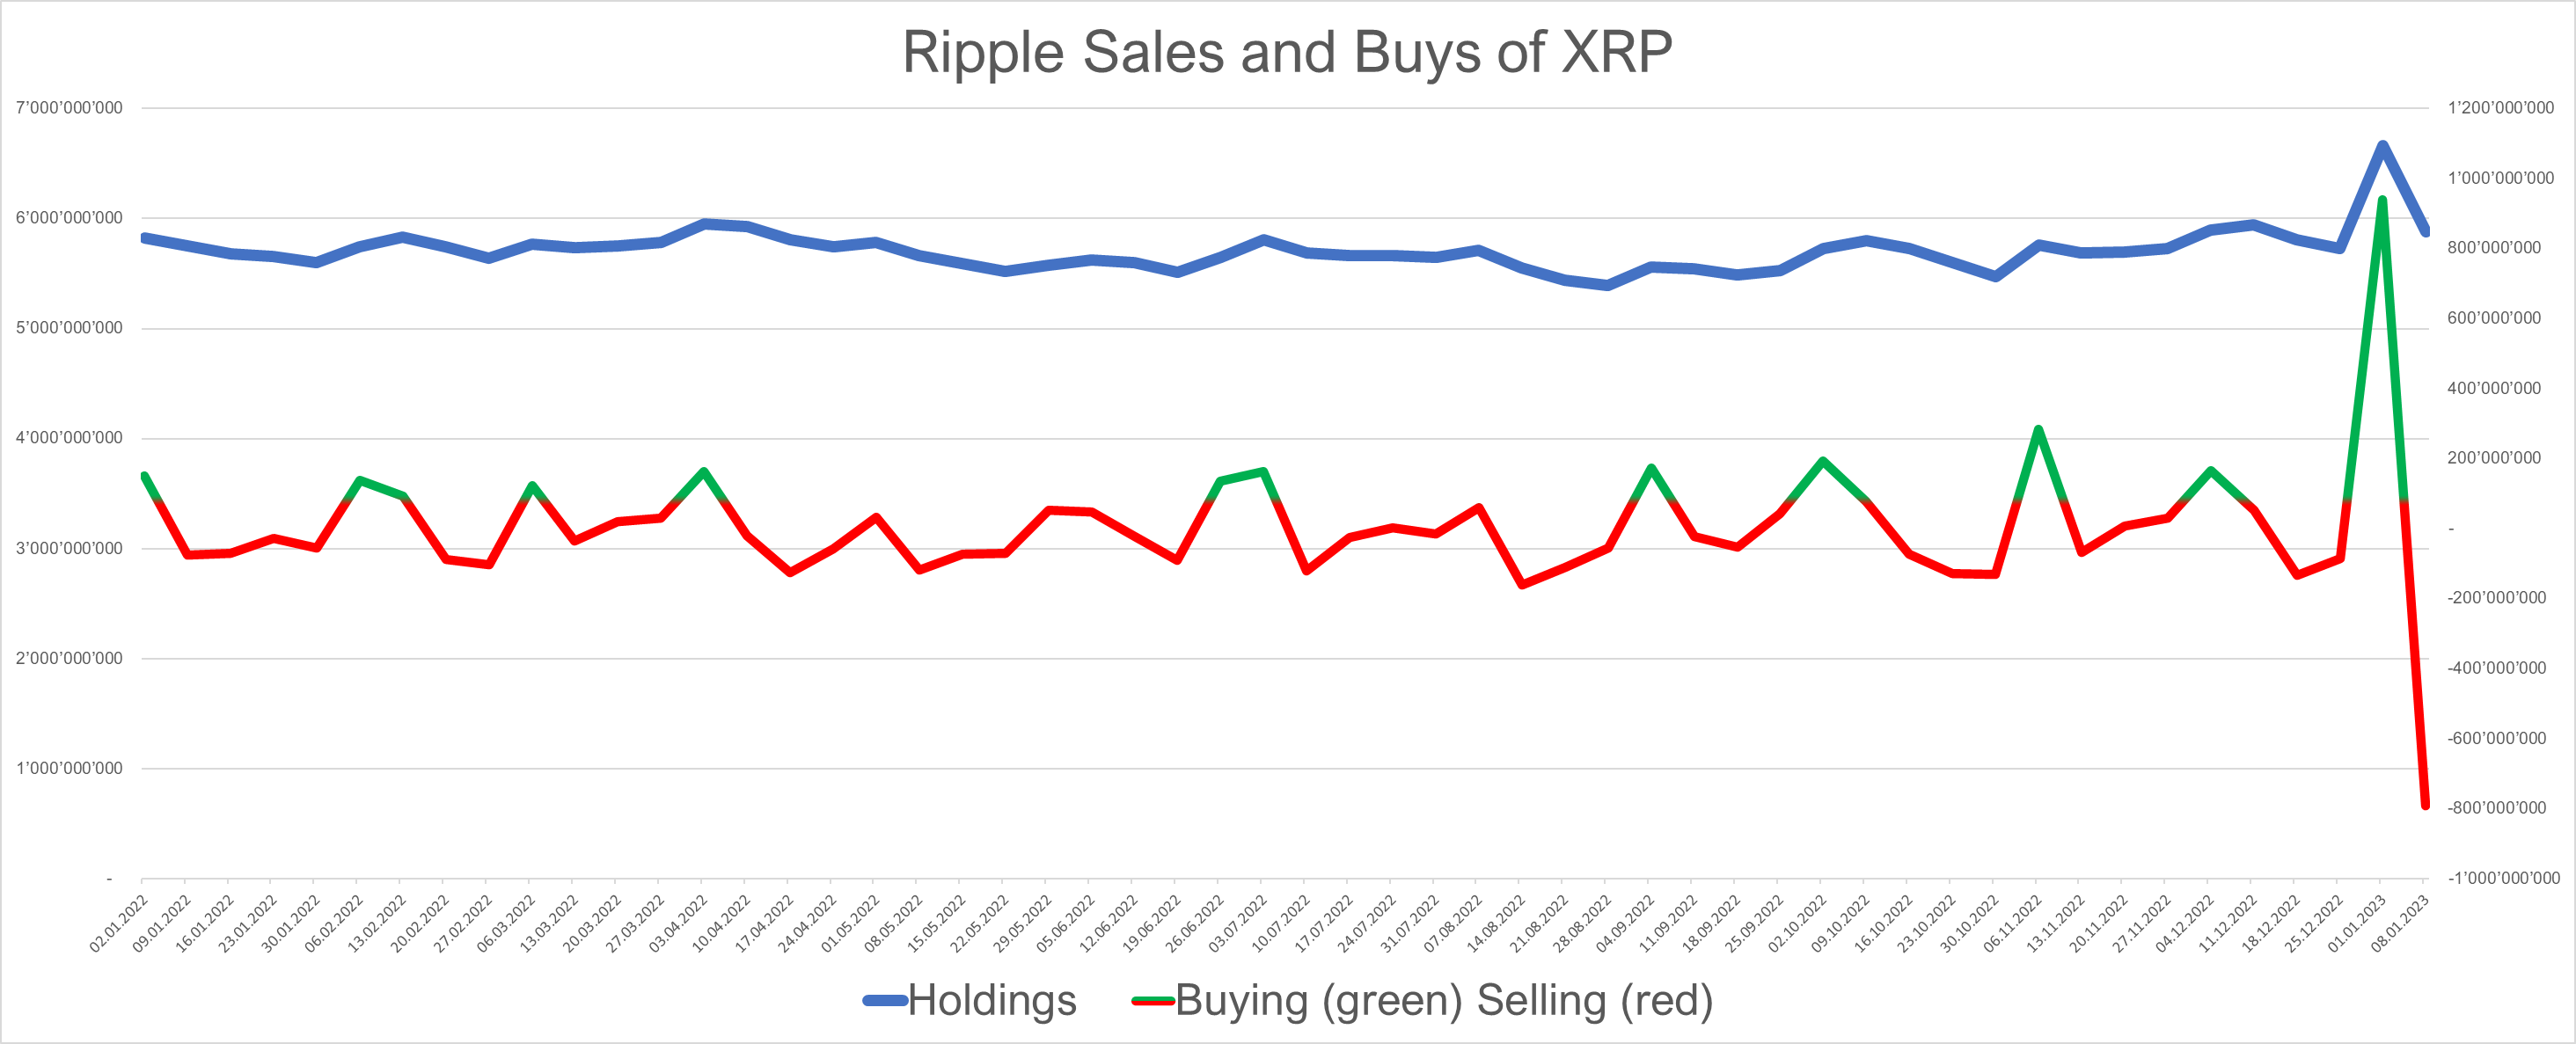 Ripple XRP buys and sales 